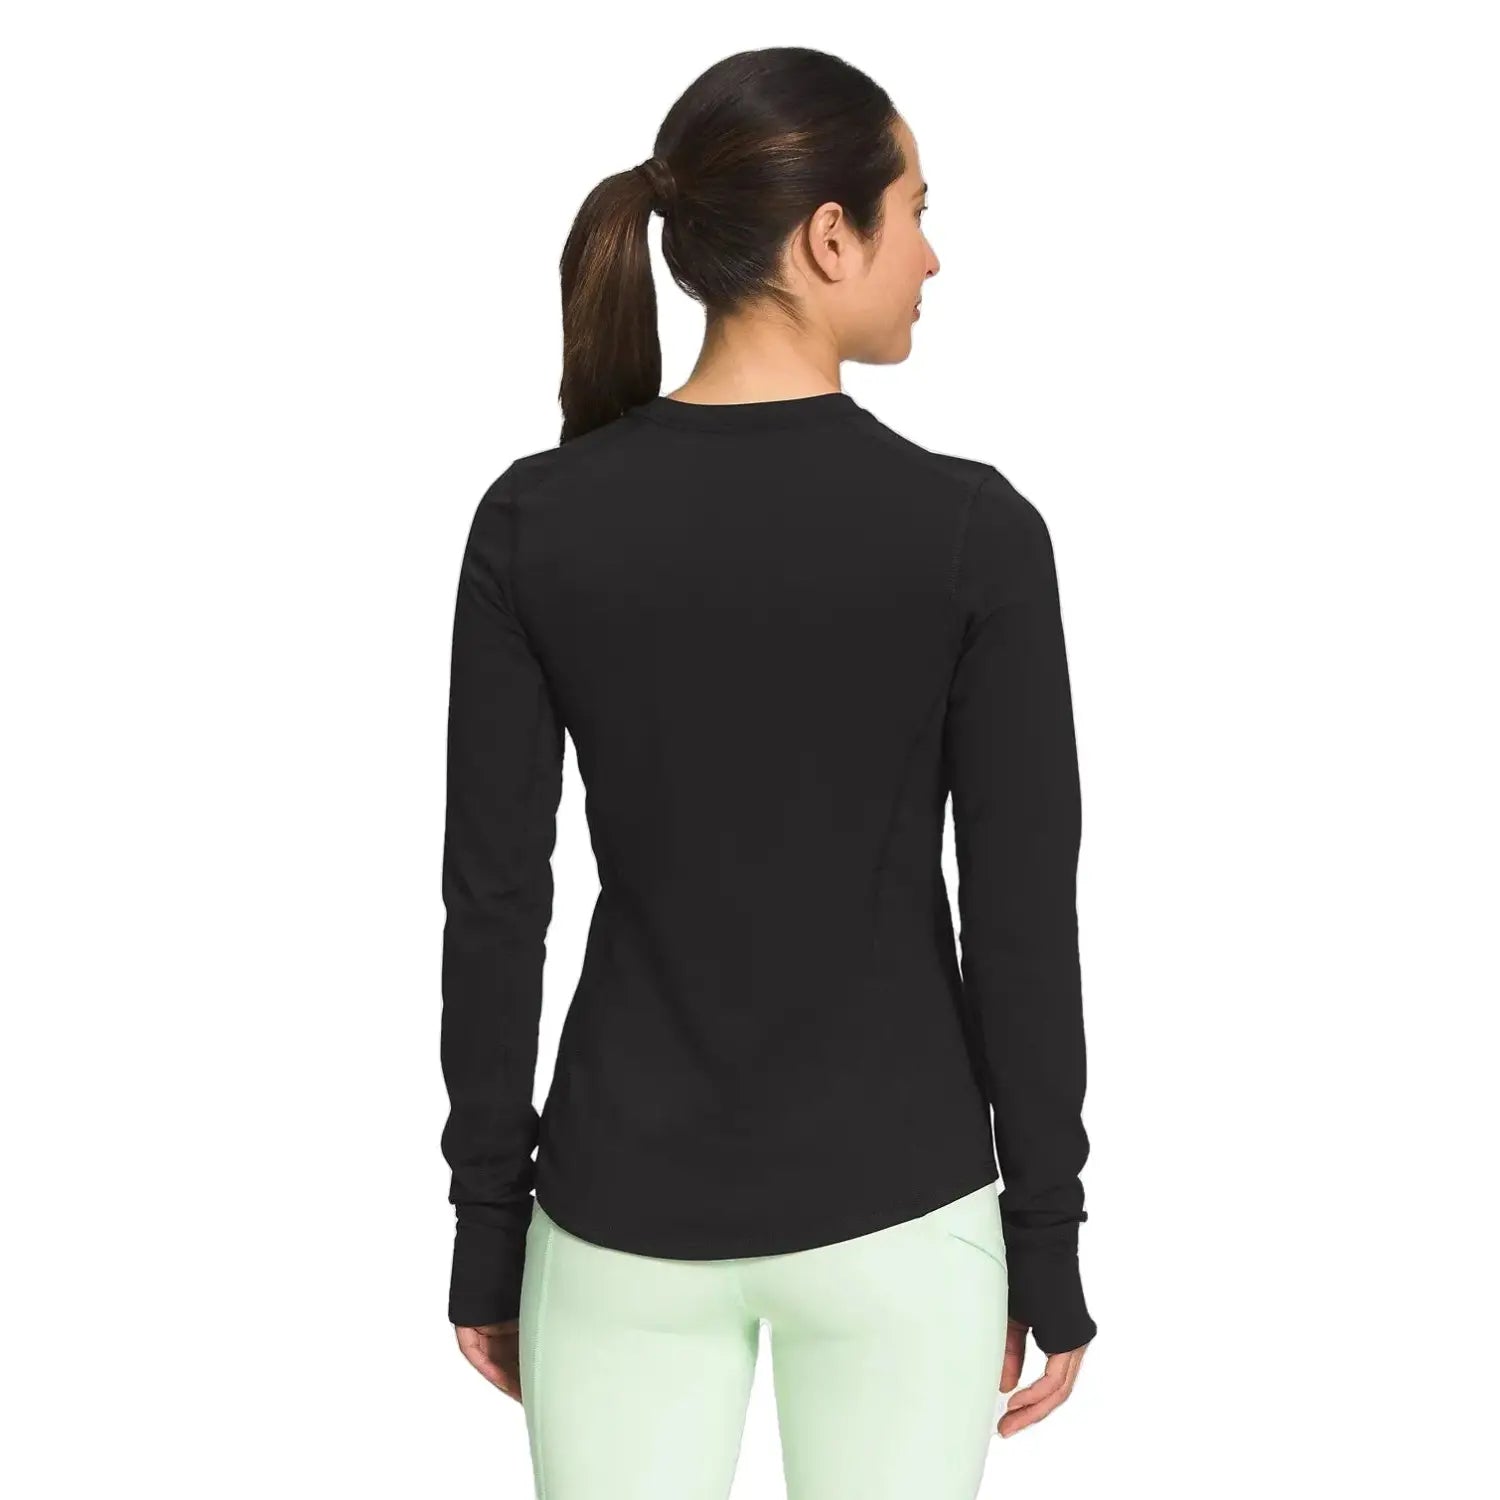 The North Face Women's Winter Warm Essential Crew shown in black on model. Back view.